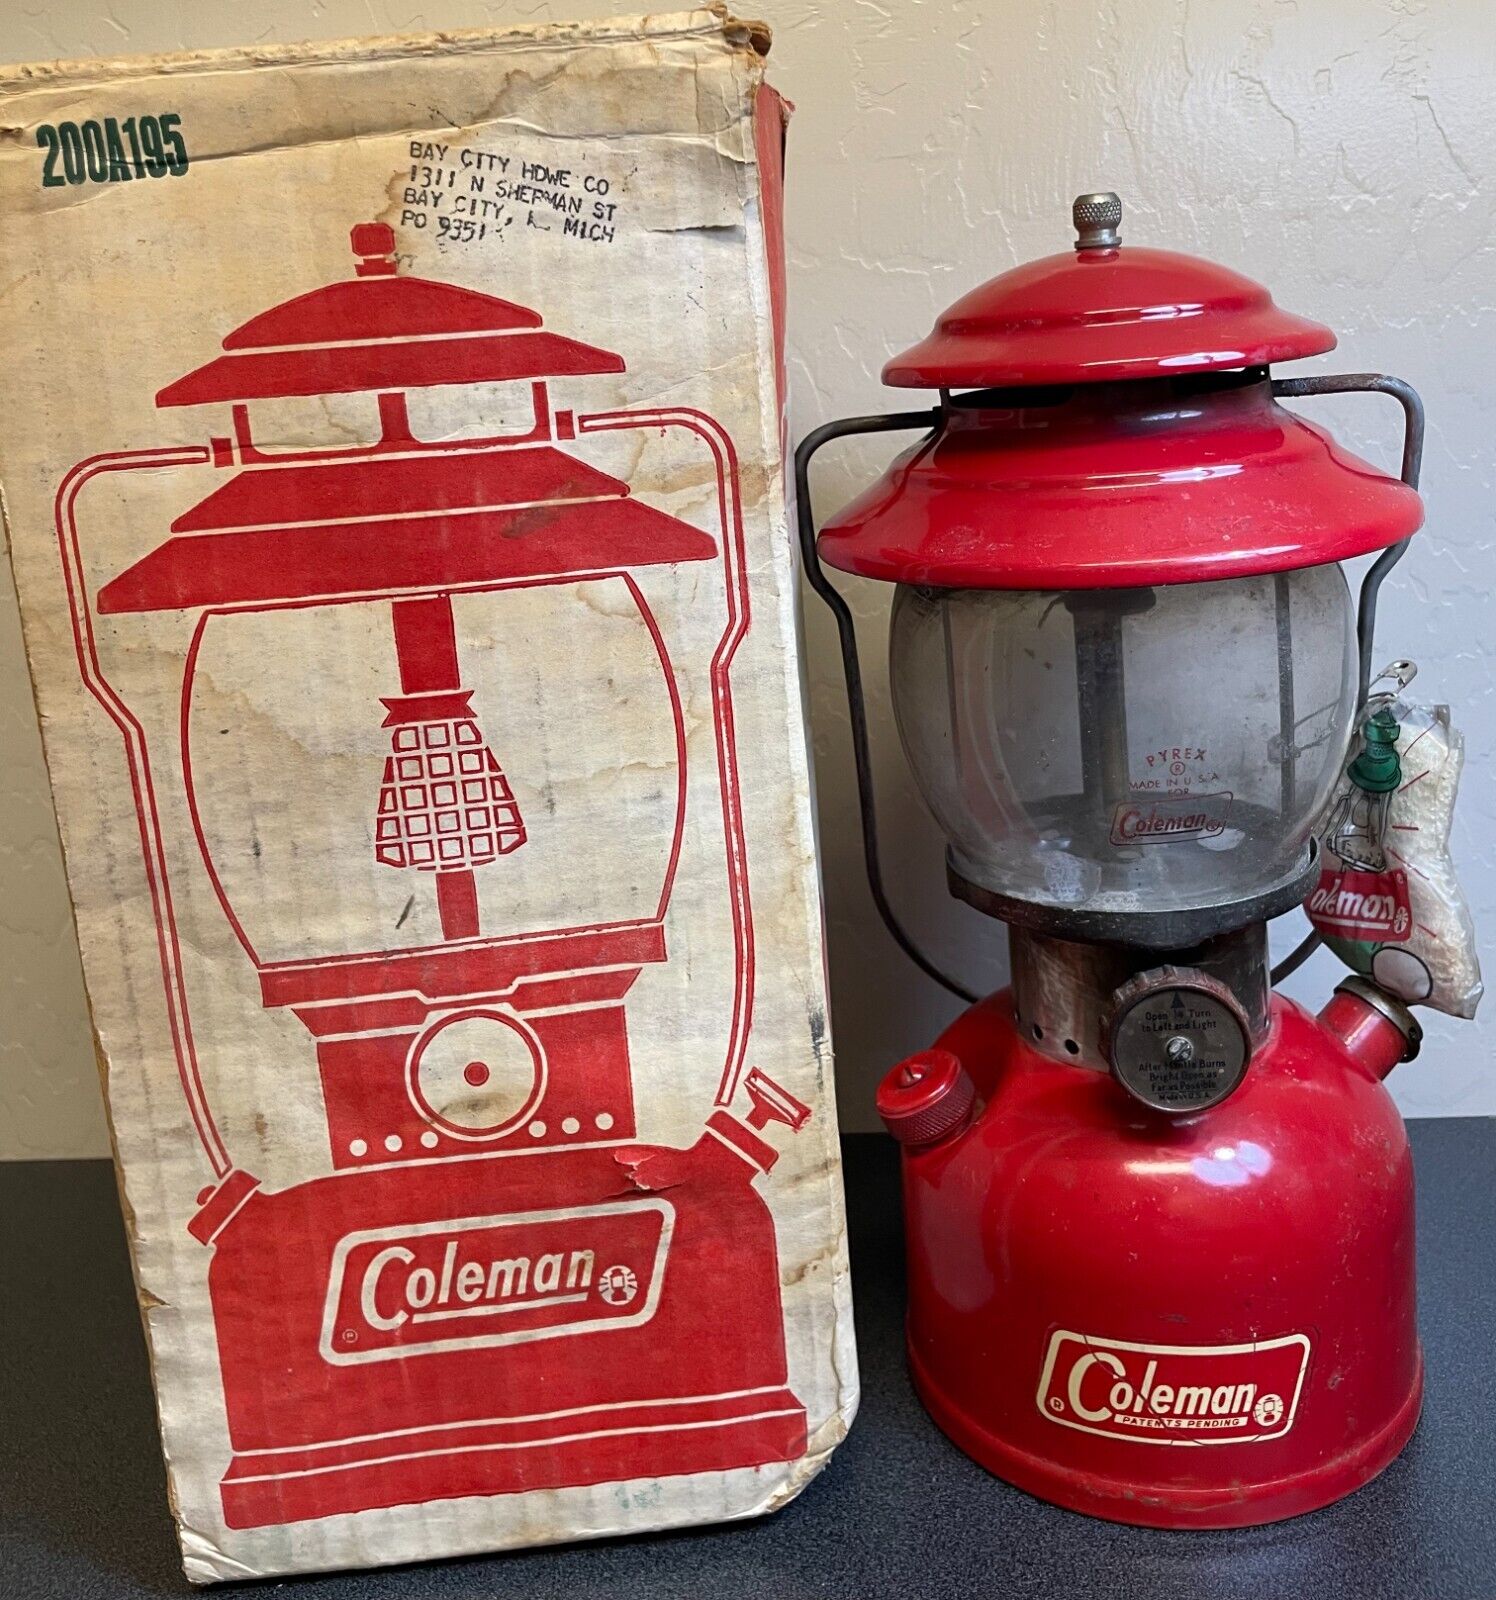 Vintage 1970 Red Coleman Lantern 200A195 with Original Box Made in USA